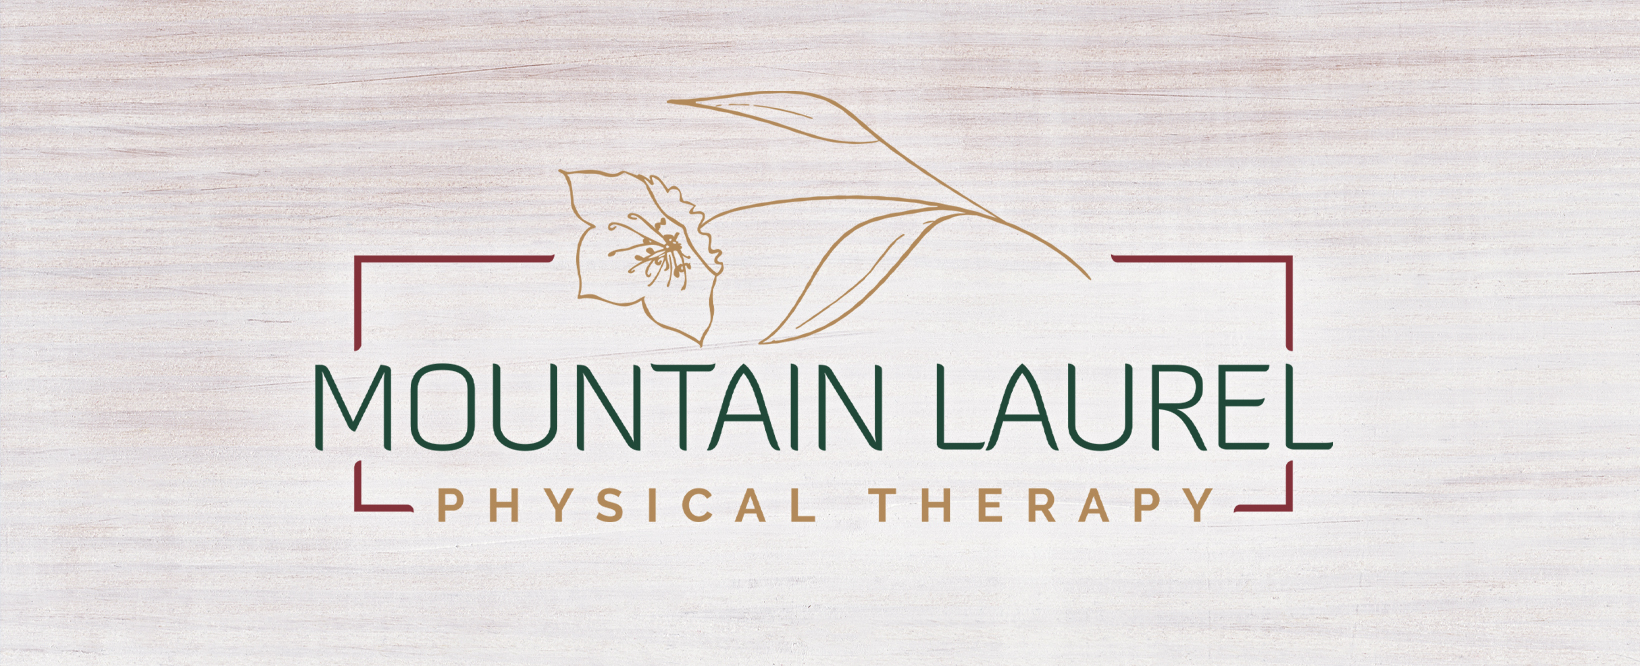 mountain-laurel-physical-therapy-clive-physical-therapy-clinic-logo.jpg